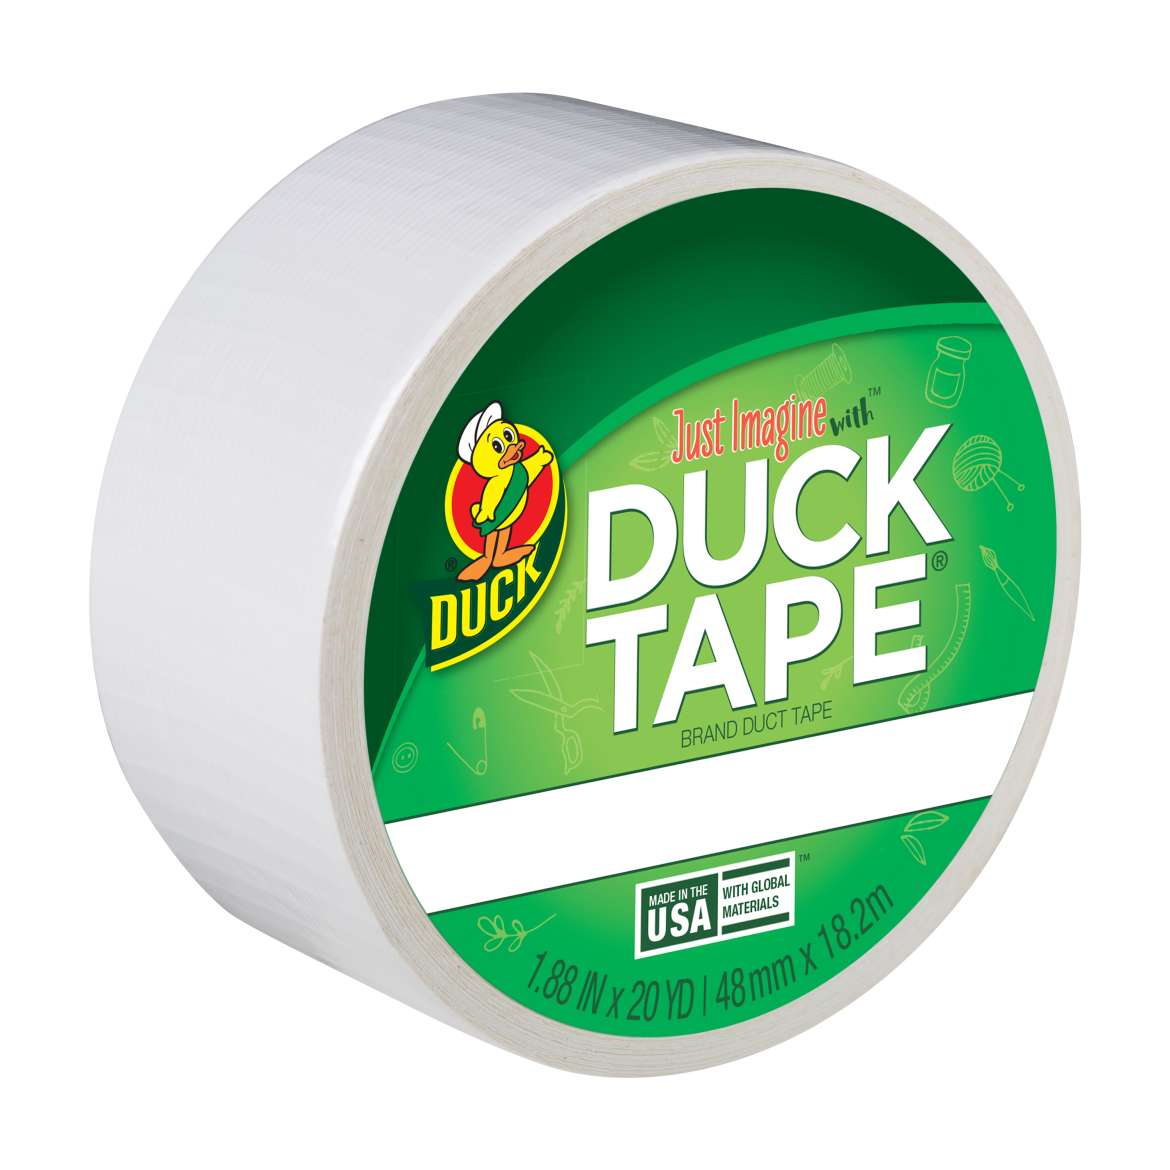 Color Duck Tape® Brand Duct Tape - Winking White, 1.88 in. x 20 yd.